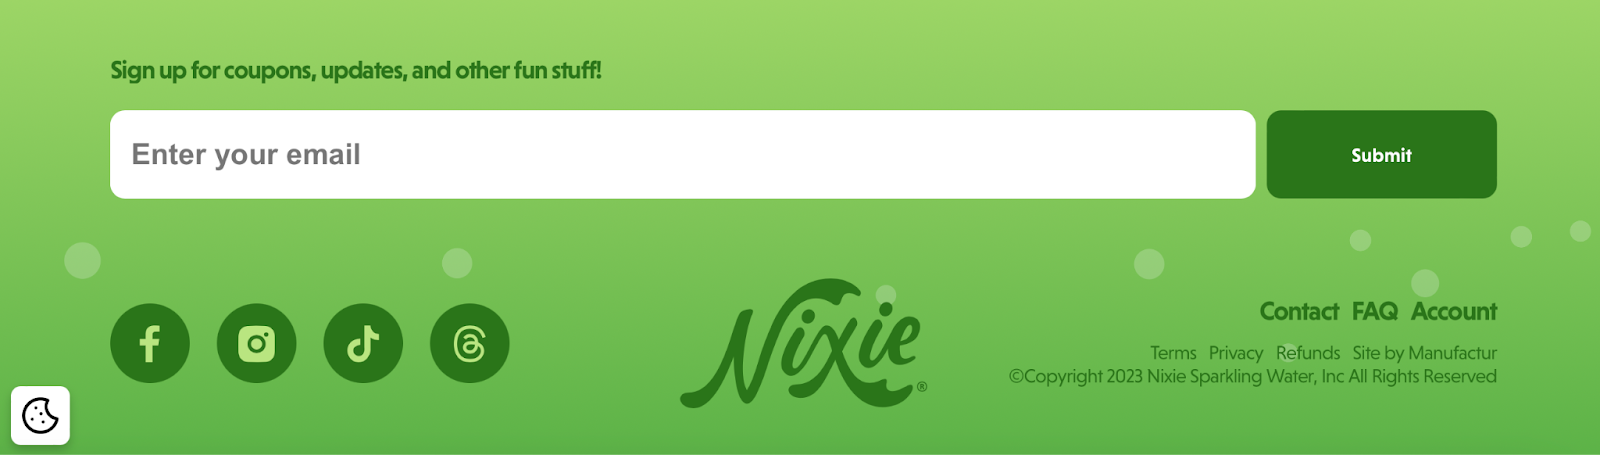 website footer examples; Nixie